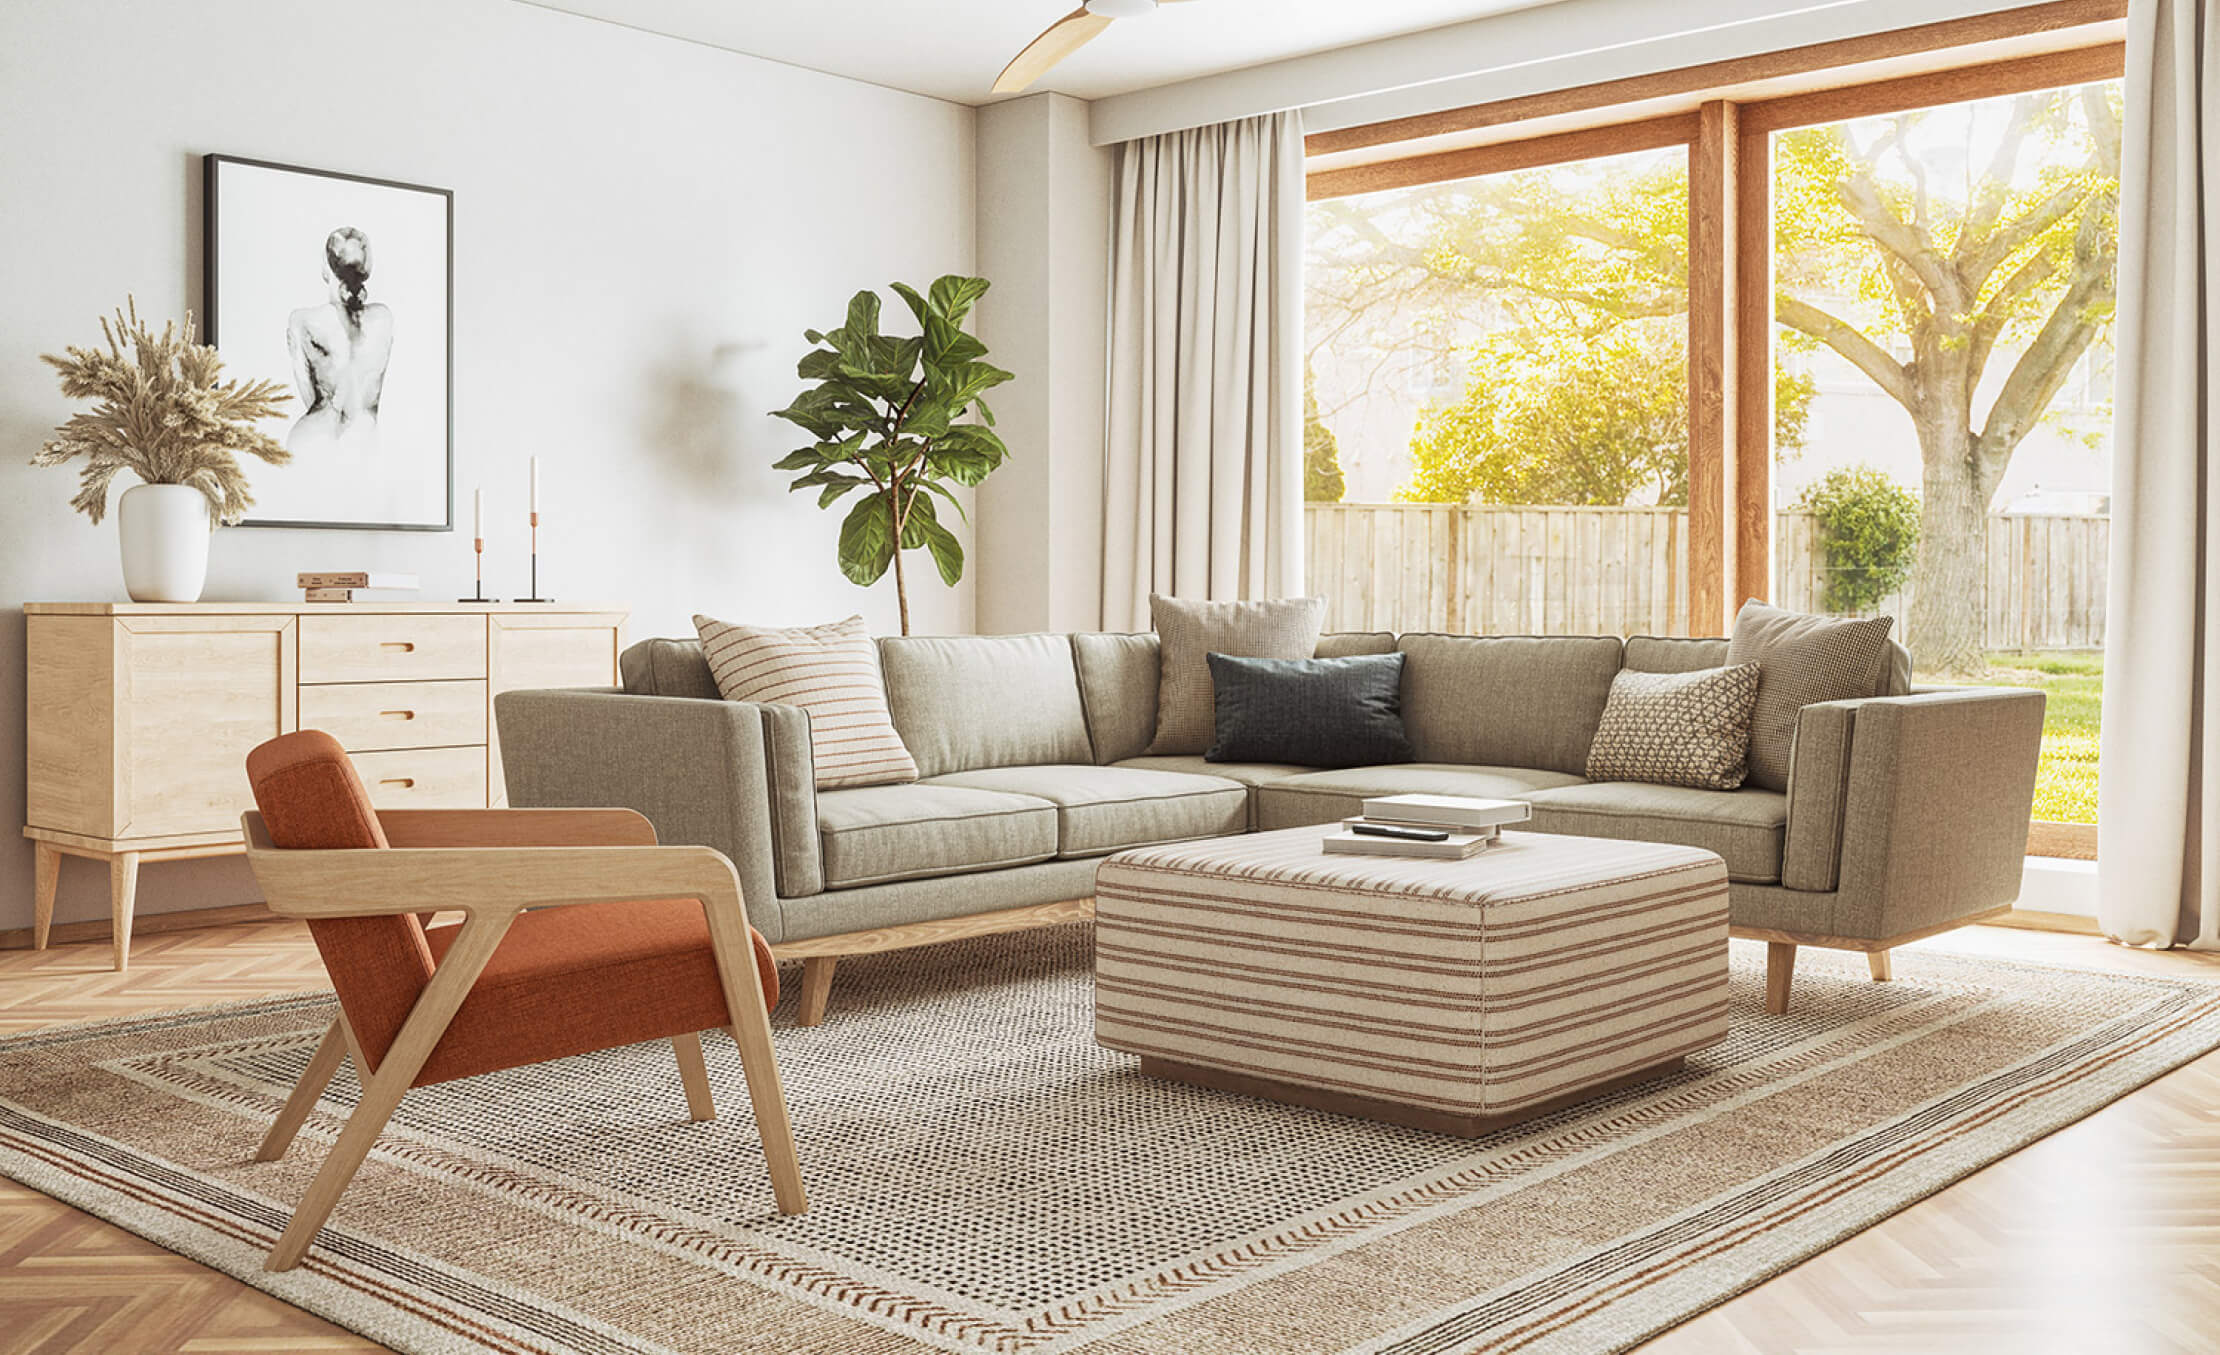 G: Shown in Maple wood with the Kirnik Corner Sectional in Smart Smoke fabric, Burr Accent Chair, Harlan Ottoman, and Lulu + Judge Throw Pillows